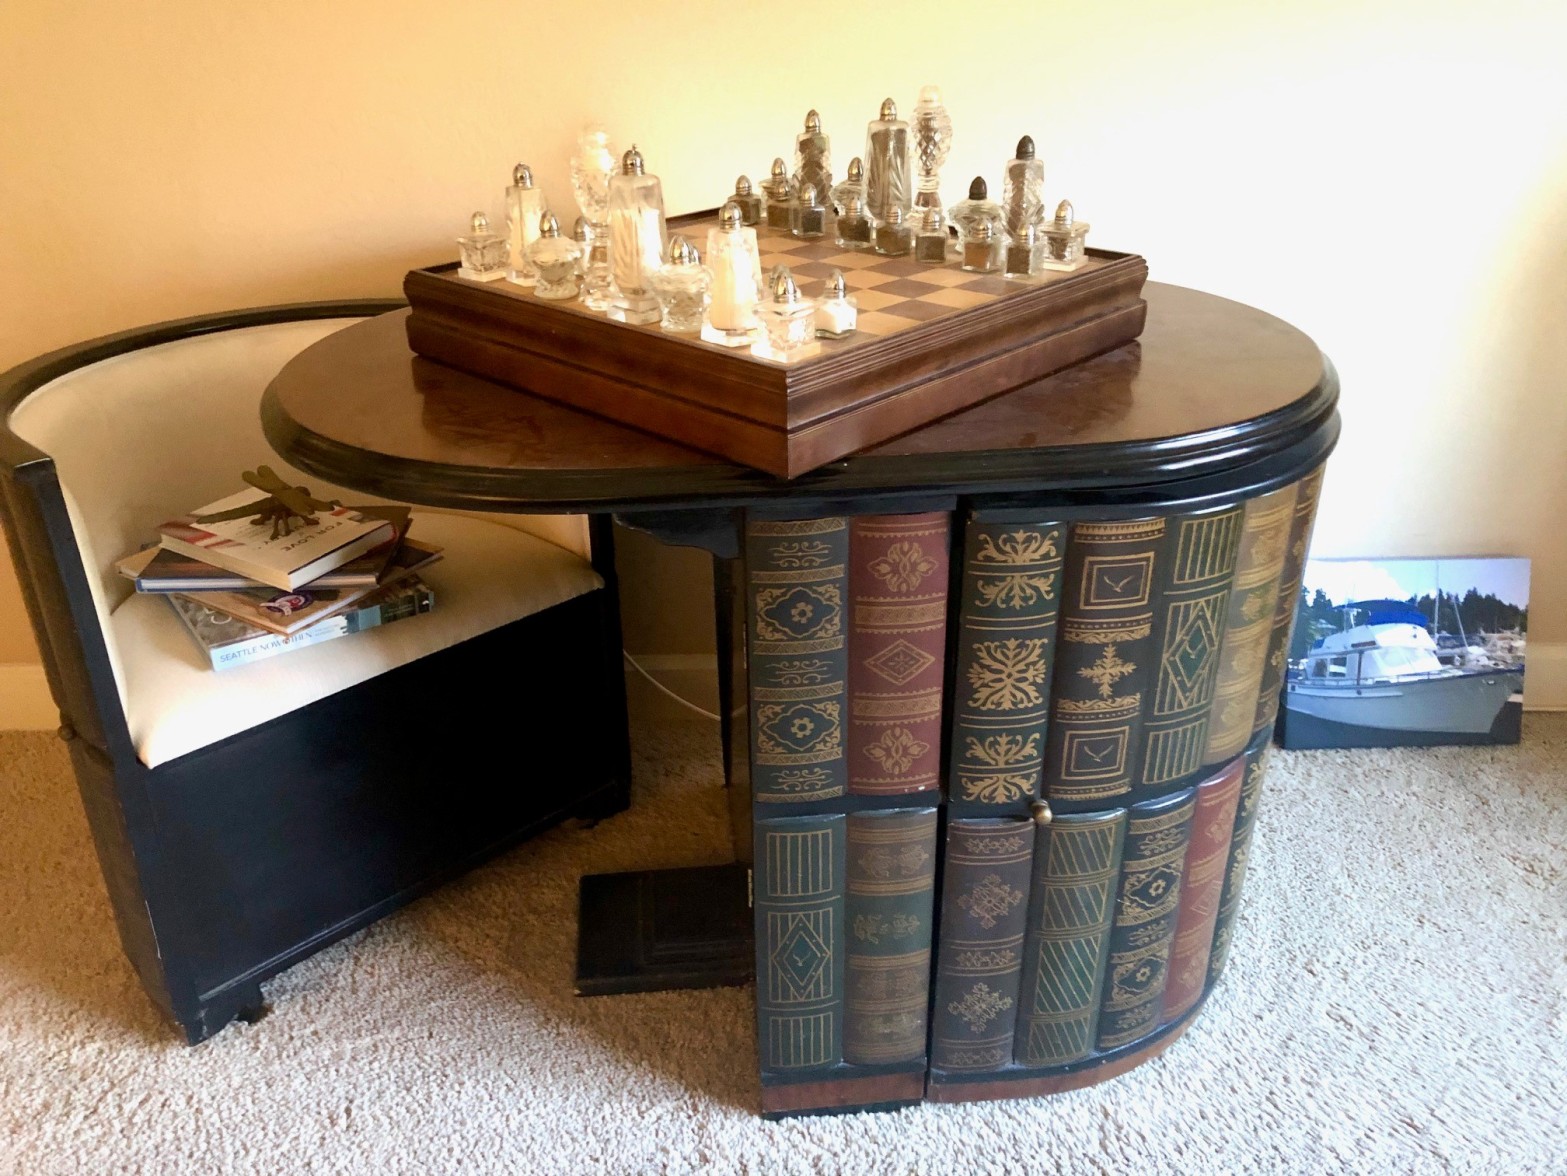 A custom table that looks like a bookcase. A salt and pepper shaker chess set is on top of it.